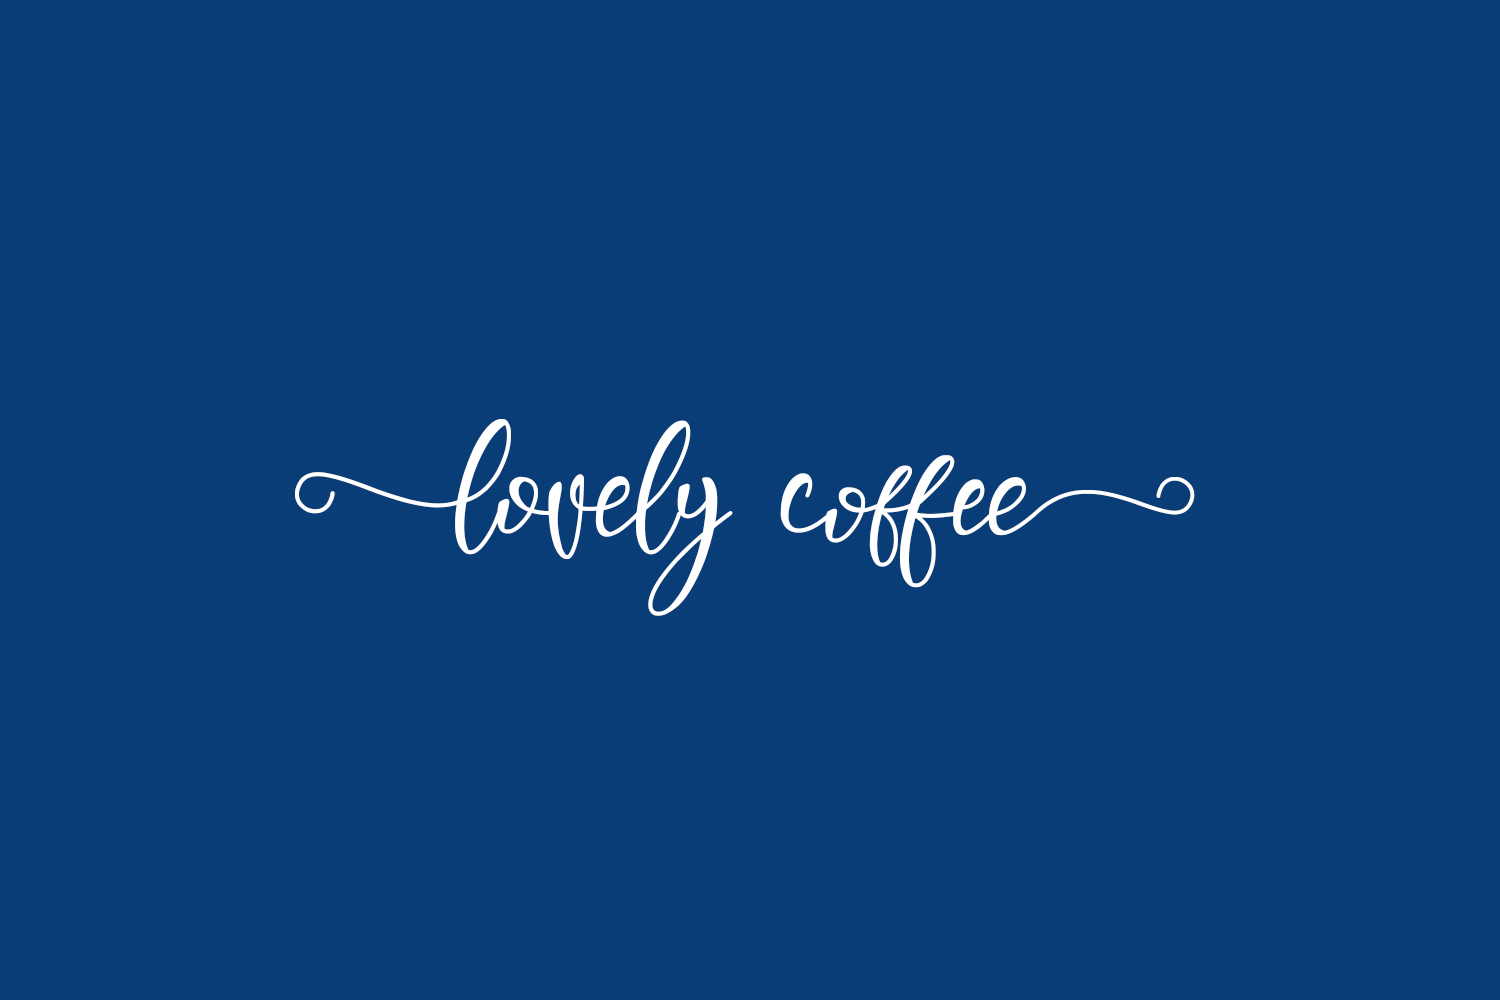 Lovely Coffee Free Font